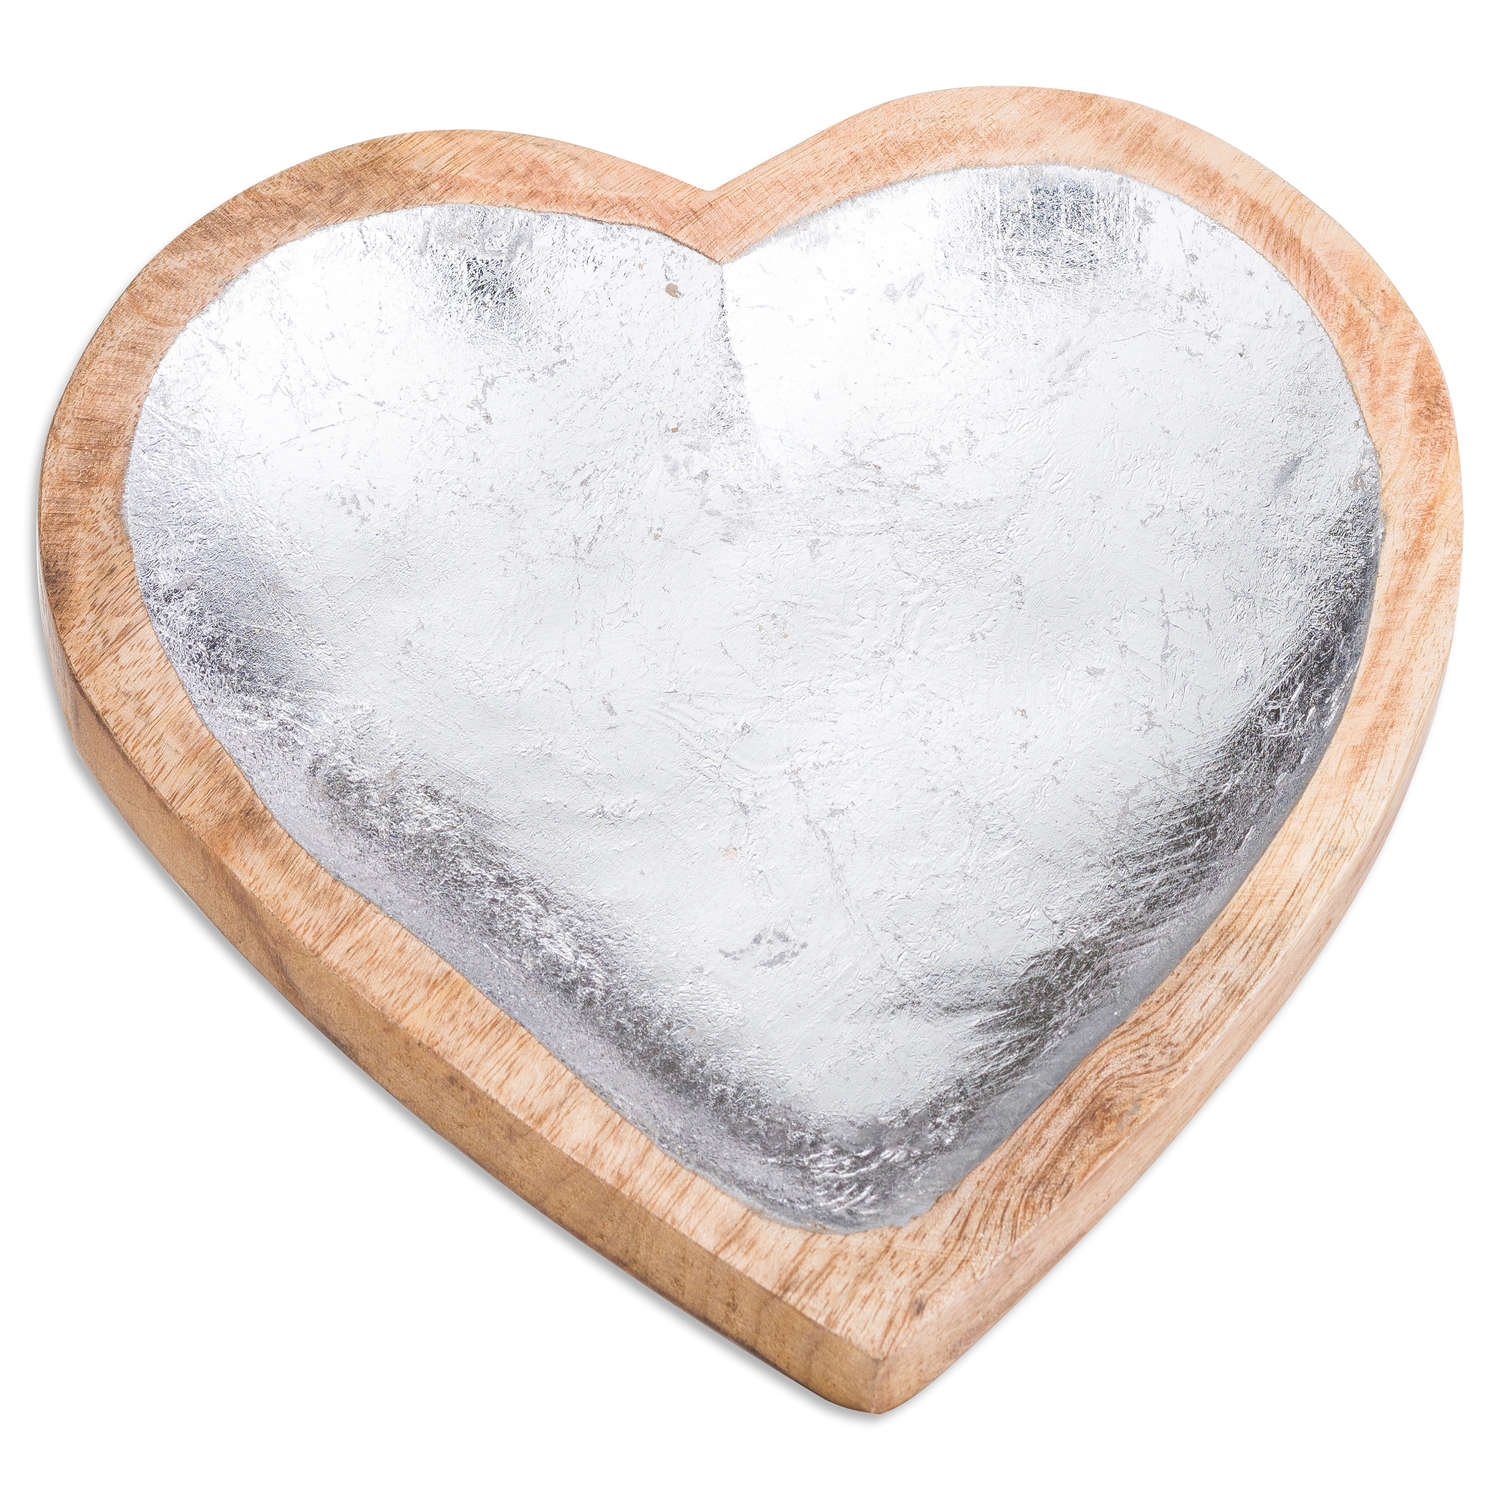 Wooden Heart Dish With Metallic Detail - Image 1